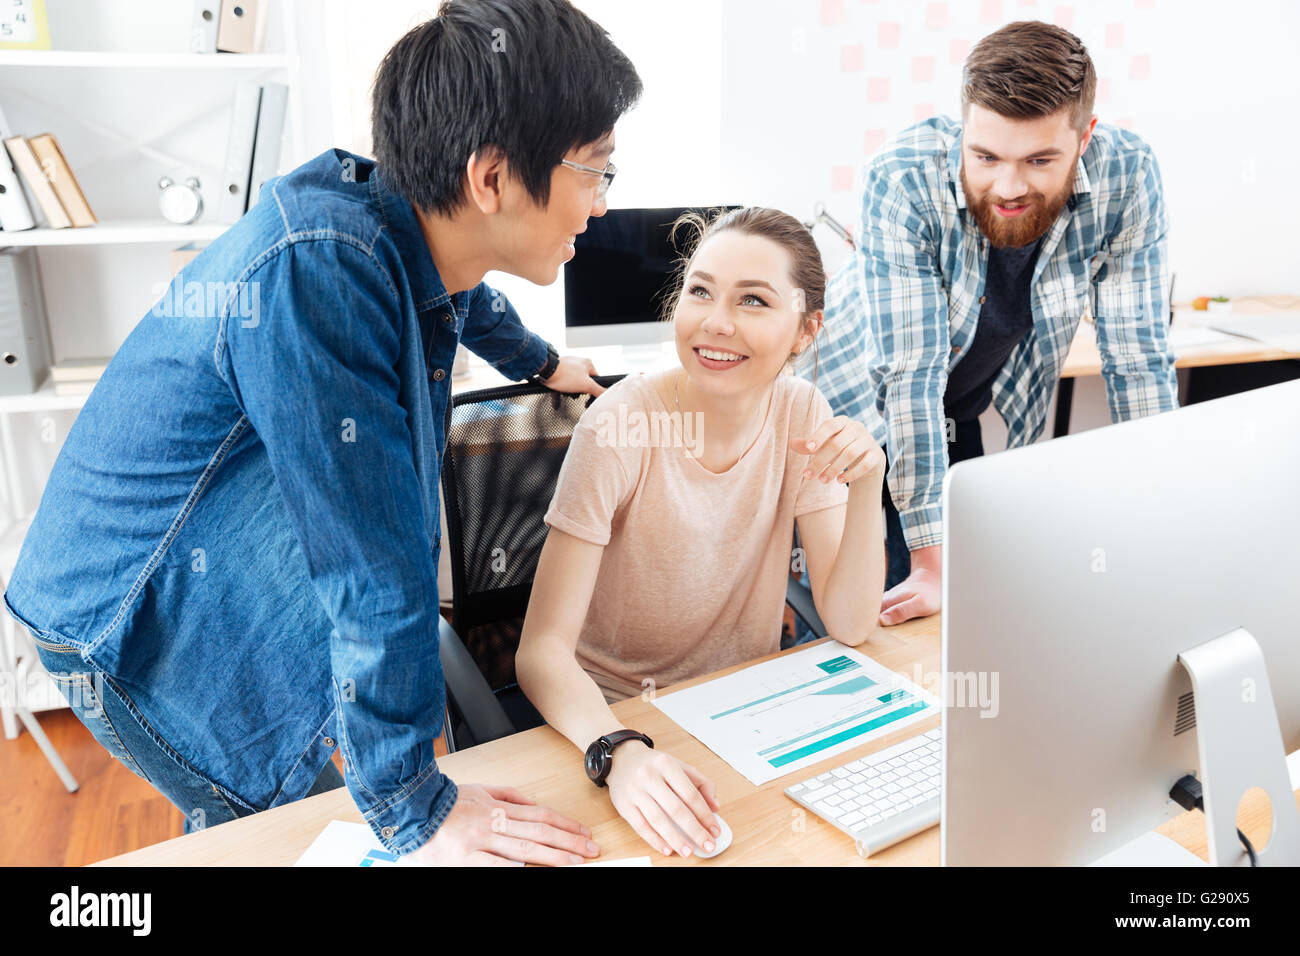 Three cheerful young businesspeople working in office together Stock Photo